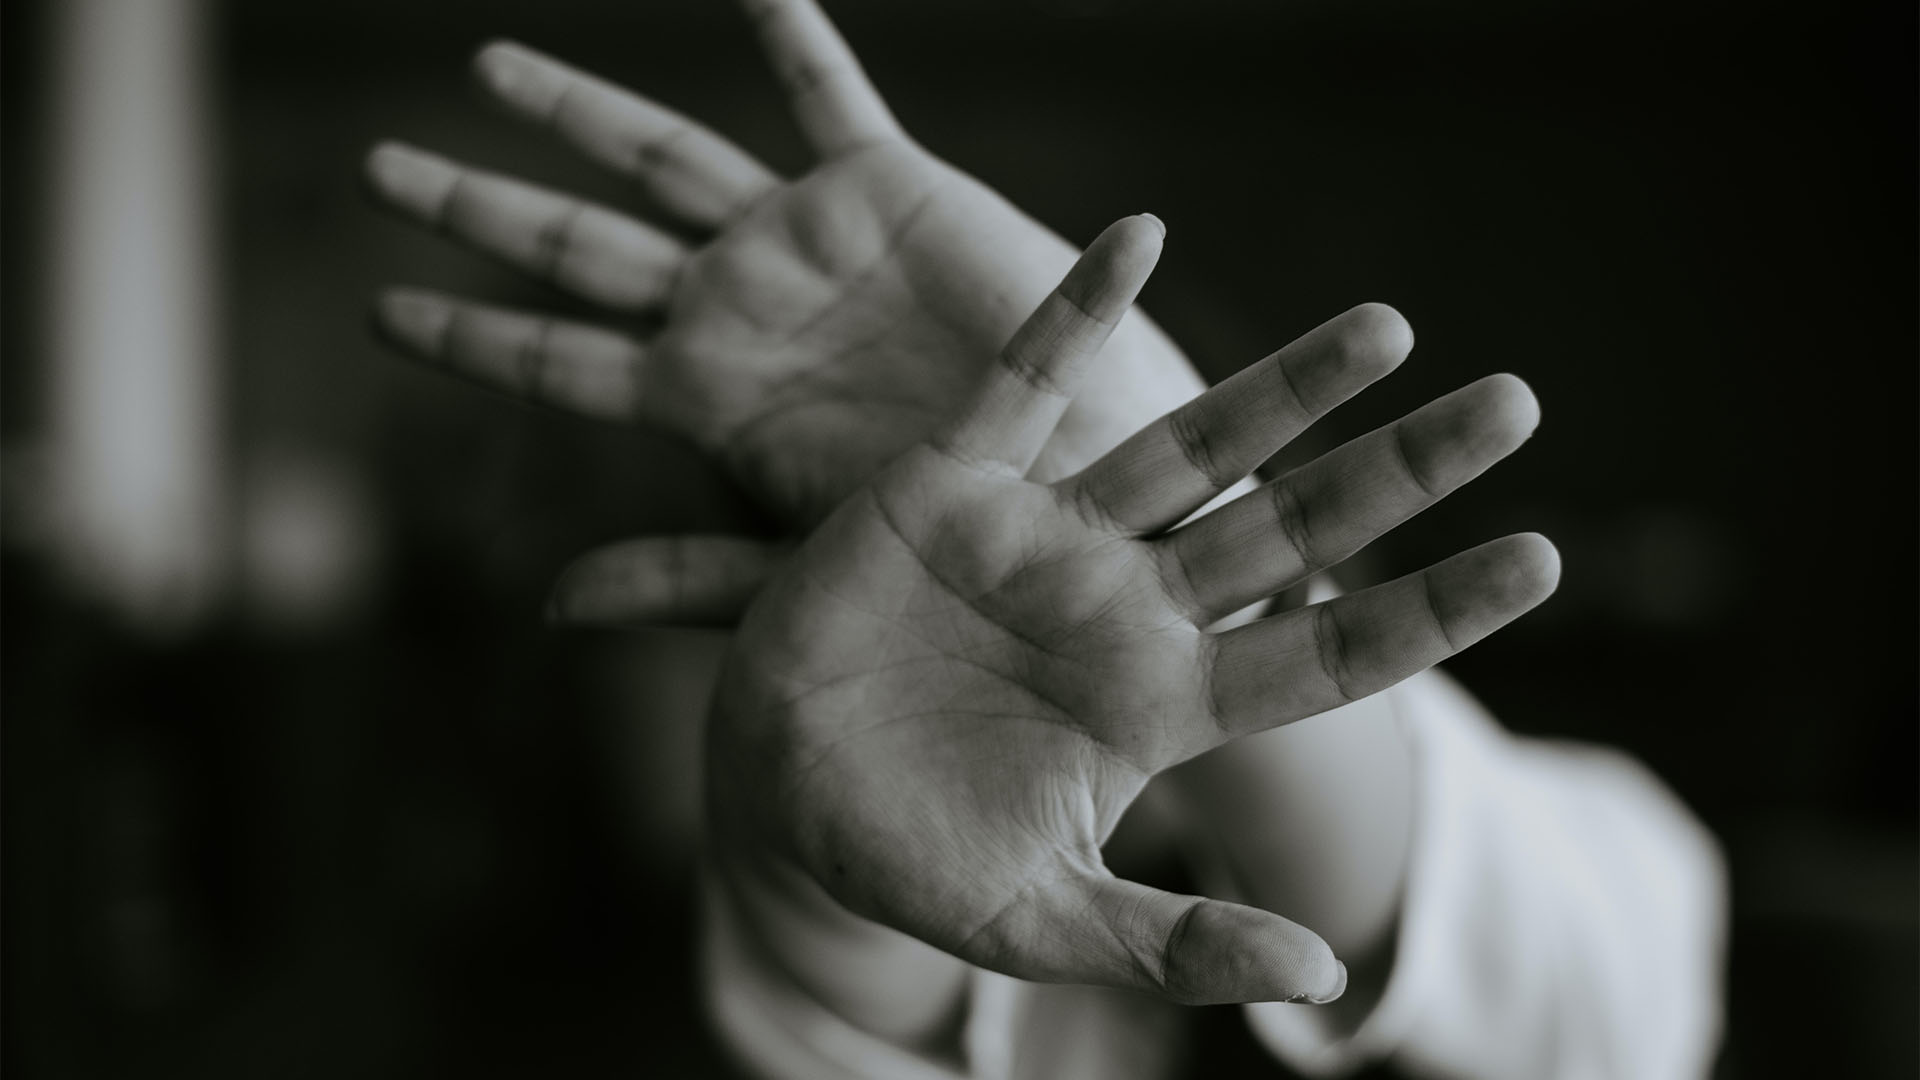 Closeup shot of a pair of hands crossing in the front hiding the person's face.